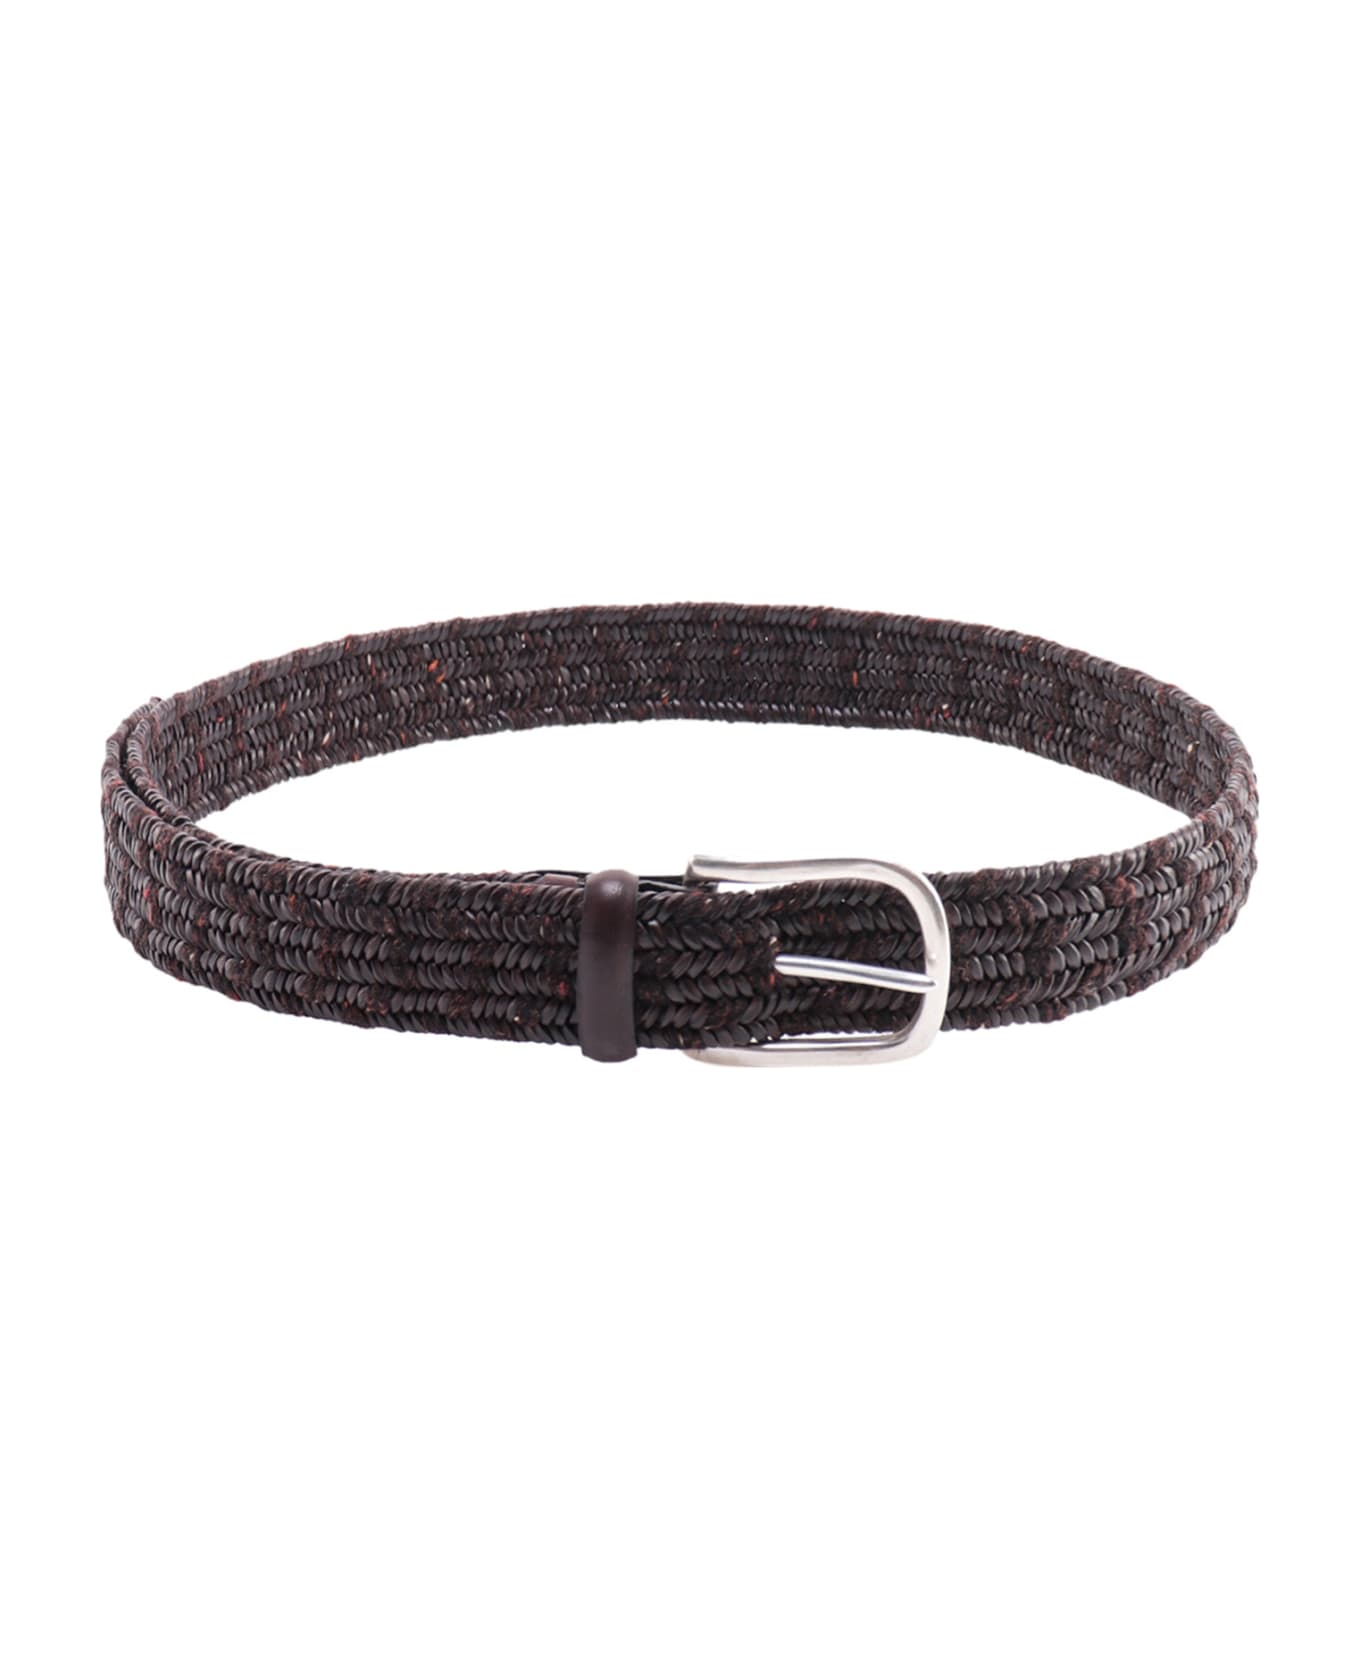 Orciani Belt Orciani - BROWN